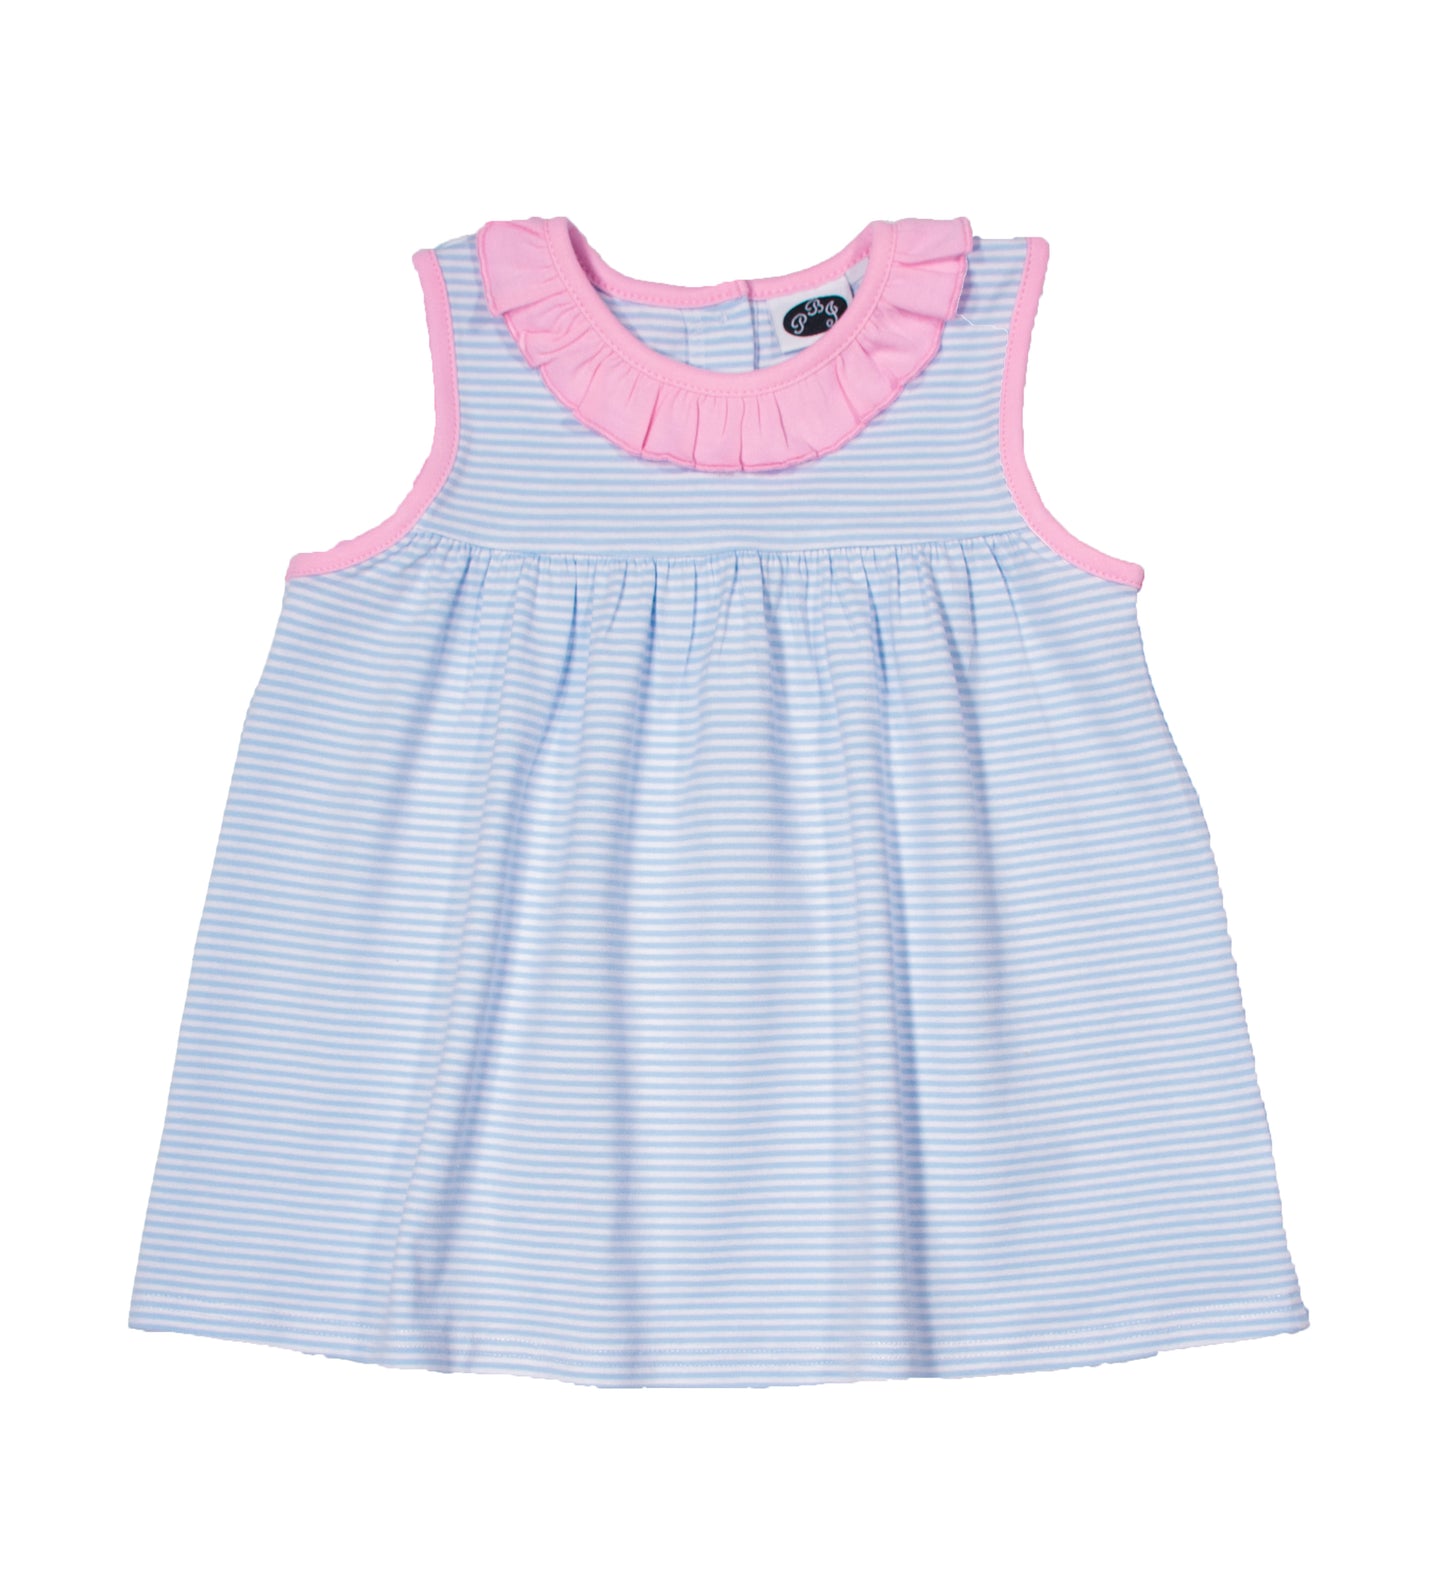 Lilly Top Sleeveless Blue Stripes with solid pink